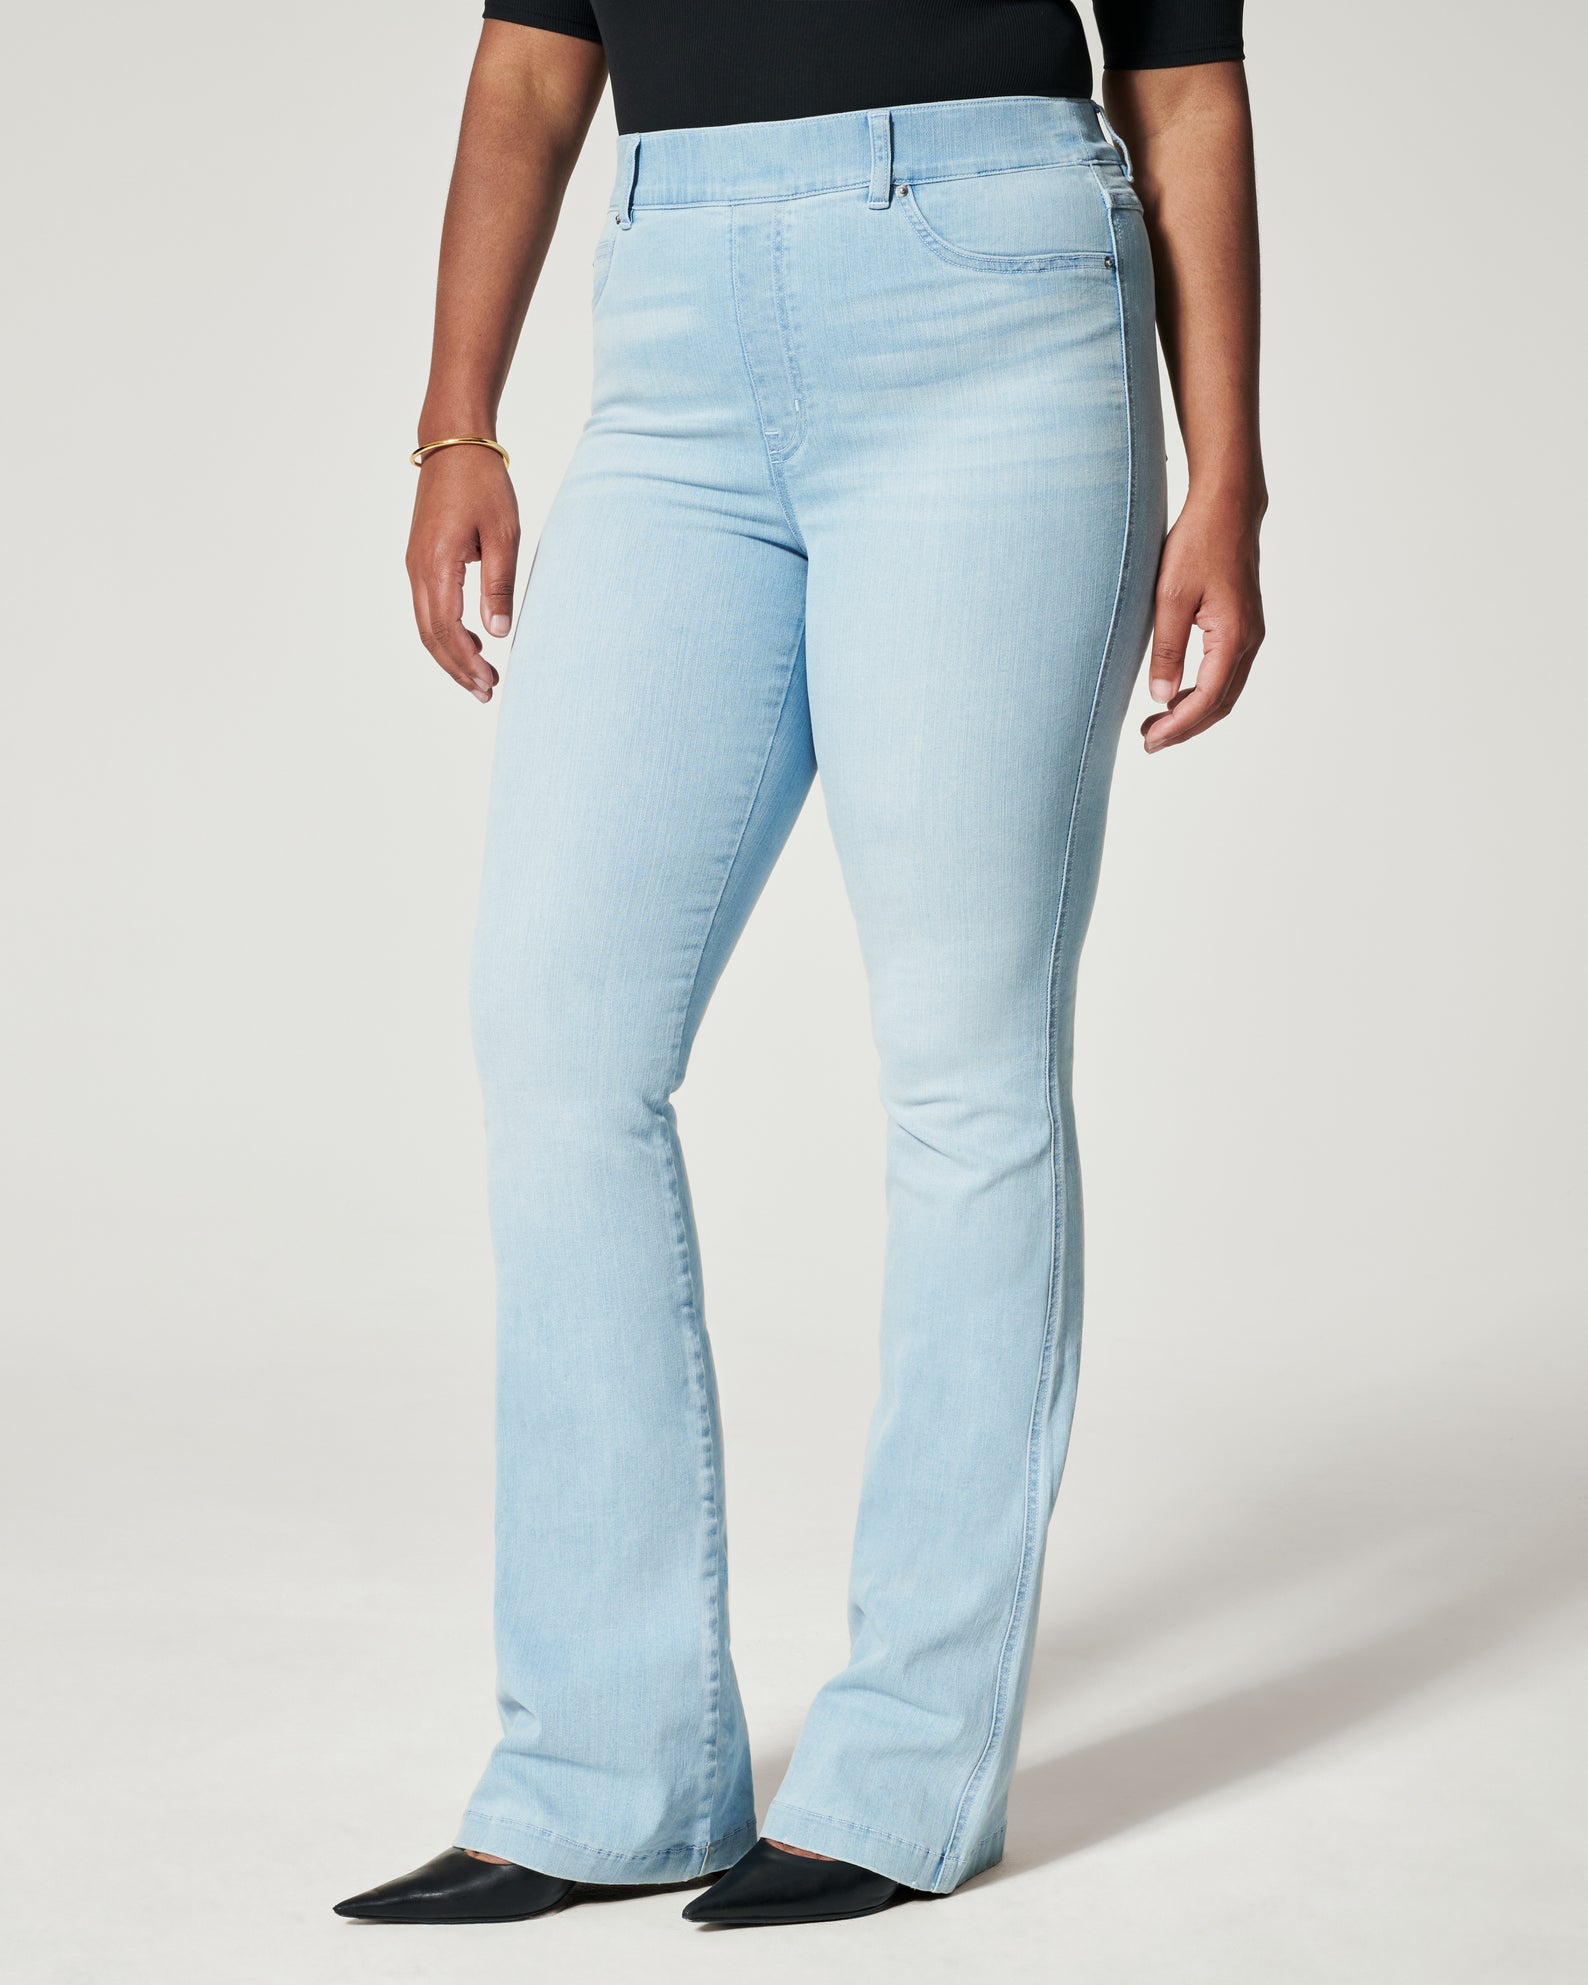 Spanx Flare Jeans Light Wash - PapillonStyles